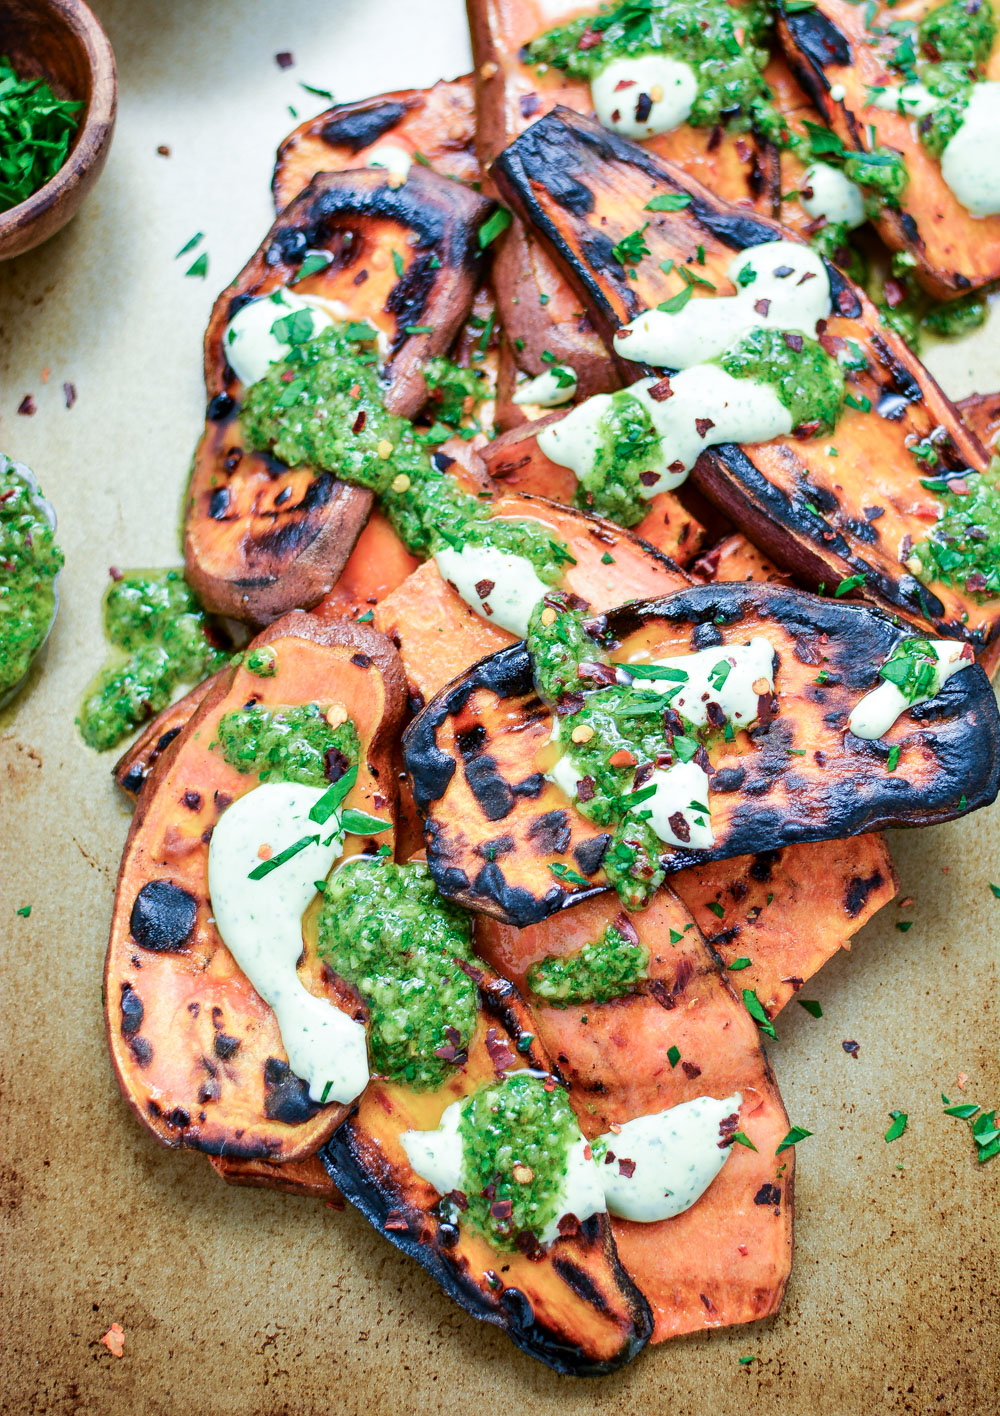 Grilled Sweet Potatoes with Cilantro Cream and Quick Chimichurri is the perfect side dish recipe to celebrate summer!